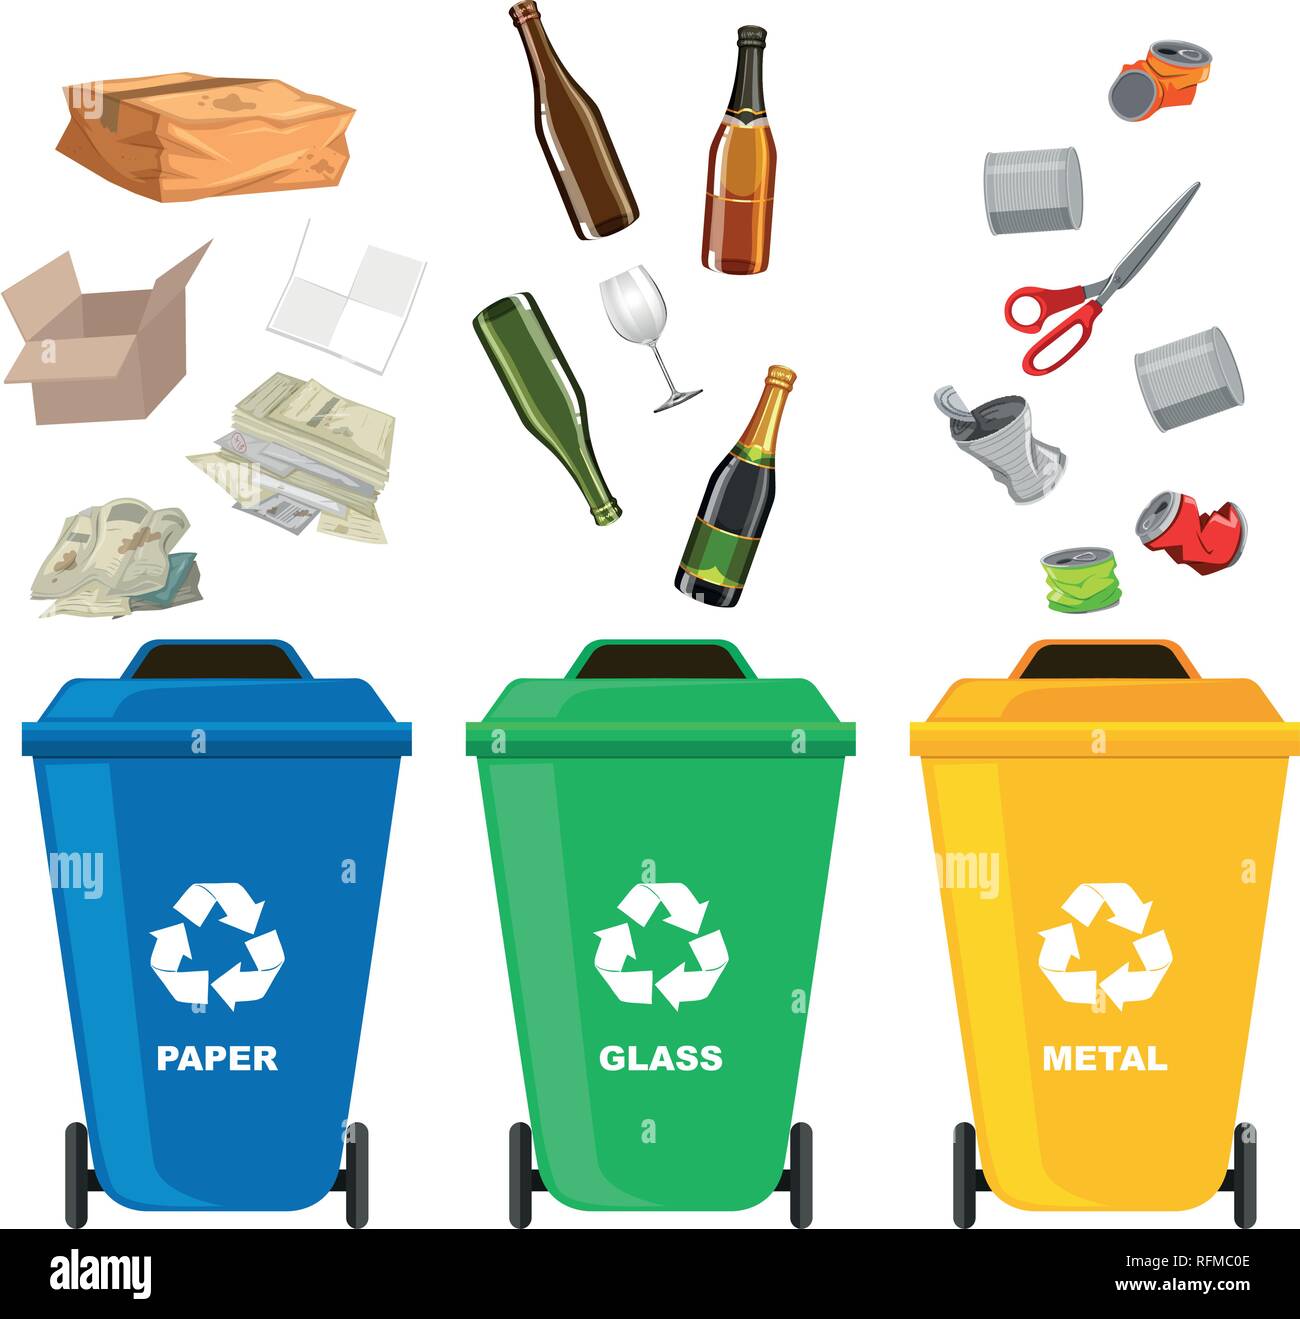 Rubbish Bins For Recycling Different Types Of Waste Garbage Containers  Vector Infographics Stock Illustration - Download Image Now - iStock